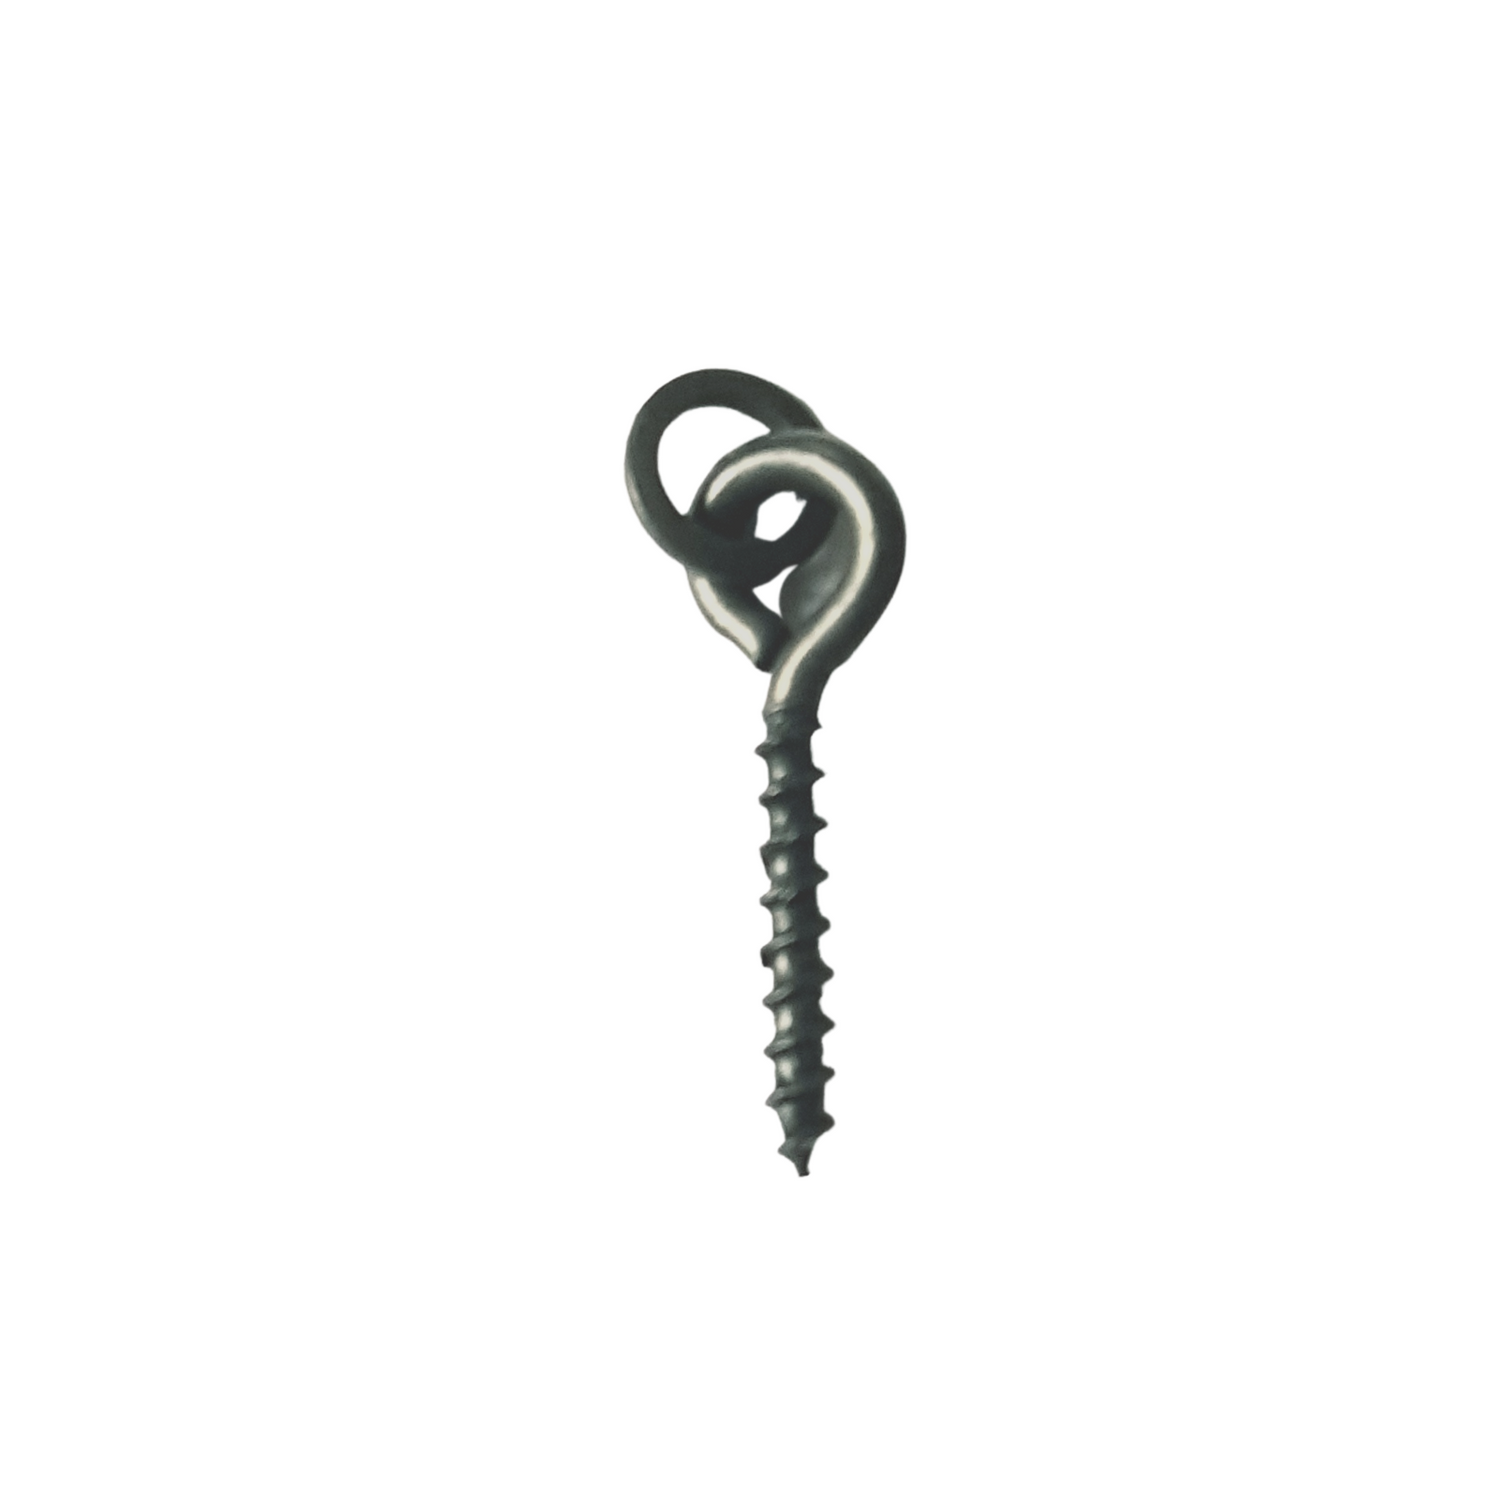 12mm Bait Screw With Rig Ring